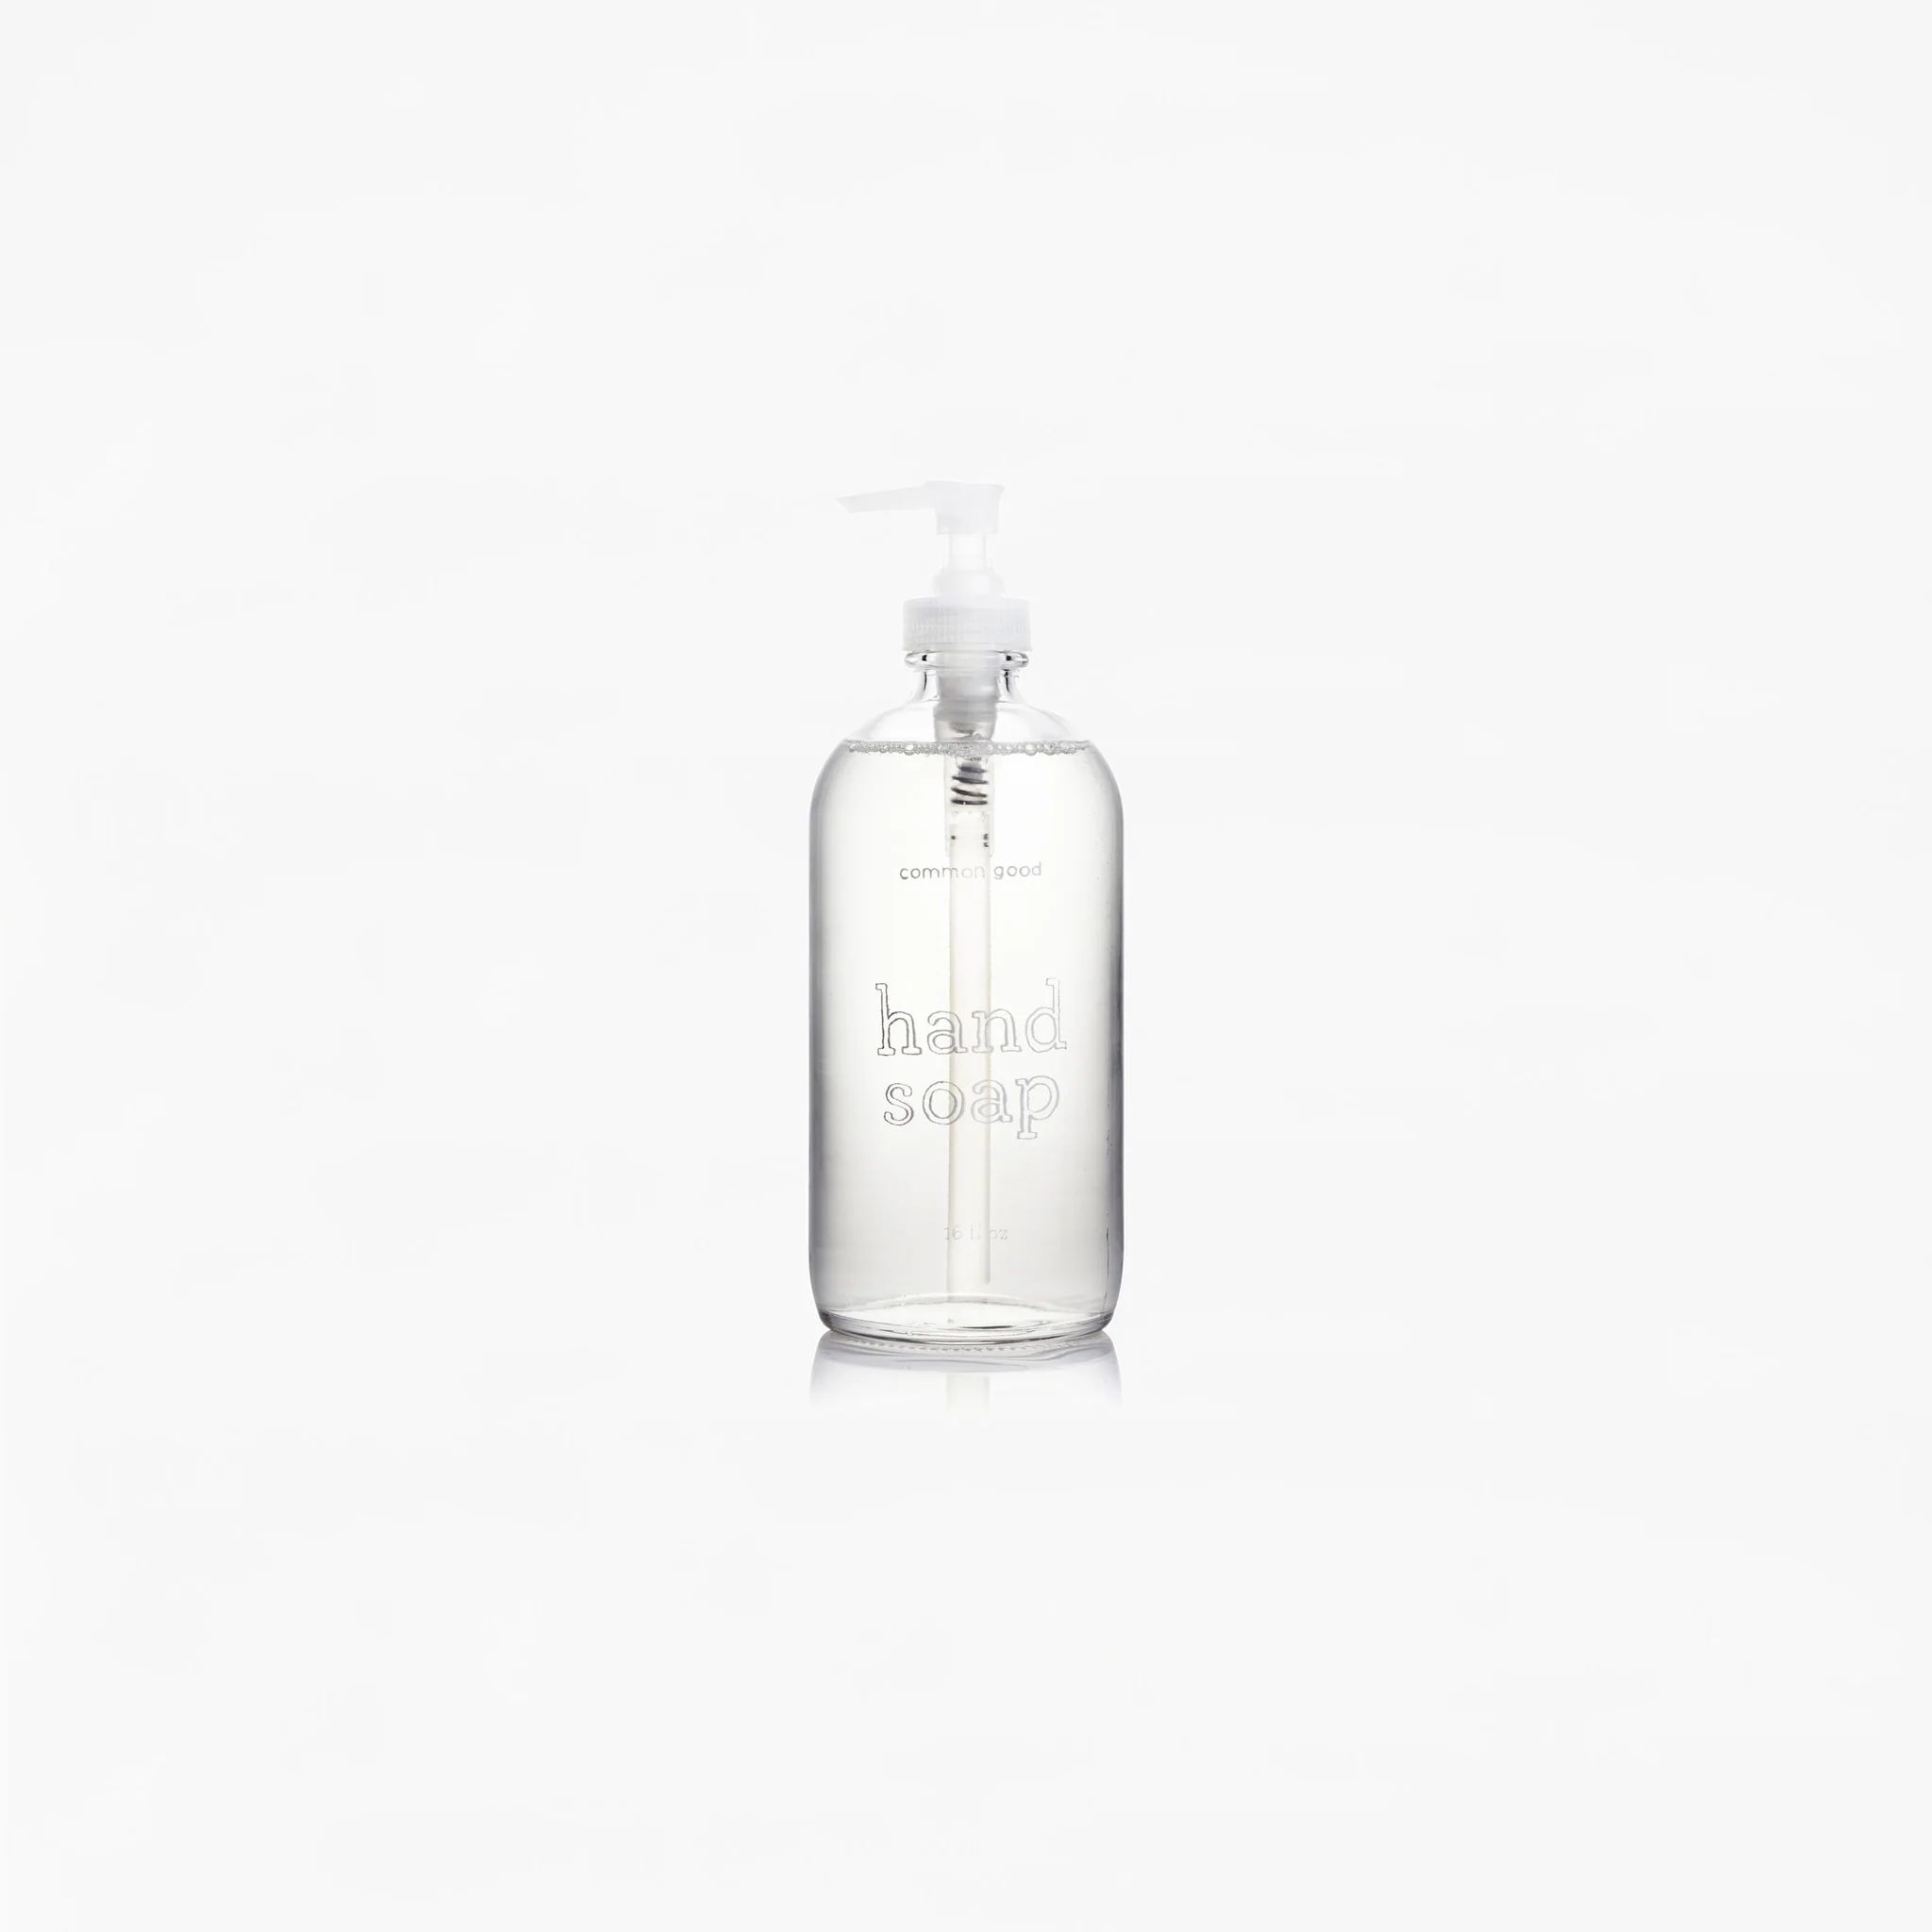 Common Good Hand Soap | Another Country Ltd